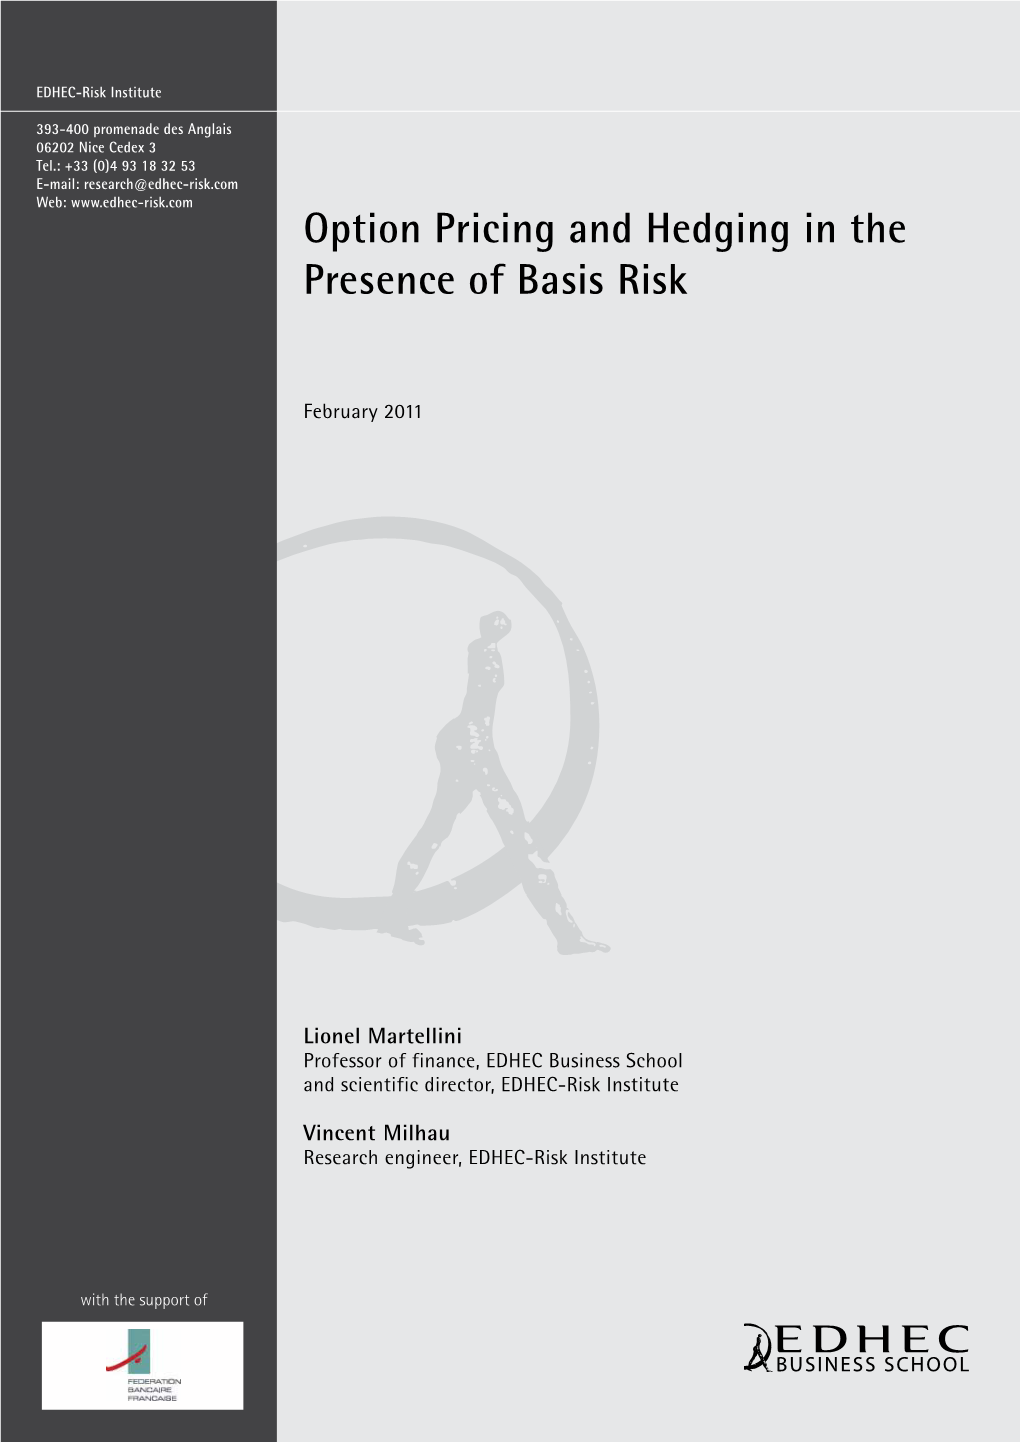 Option Pricing and Hedging in the Presence of Basis Risk